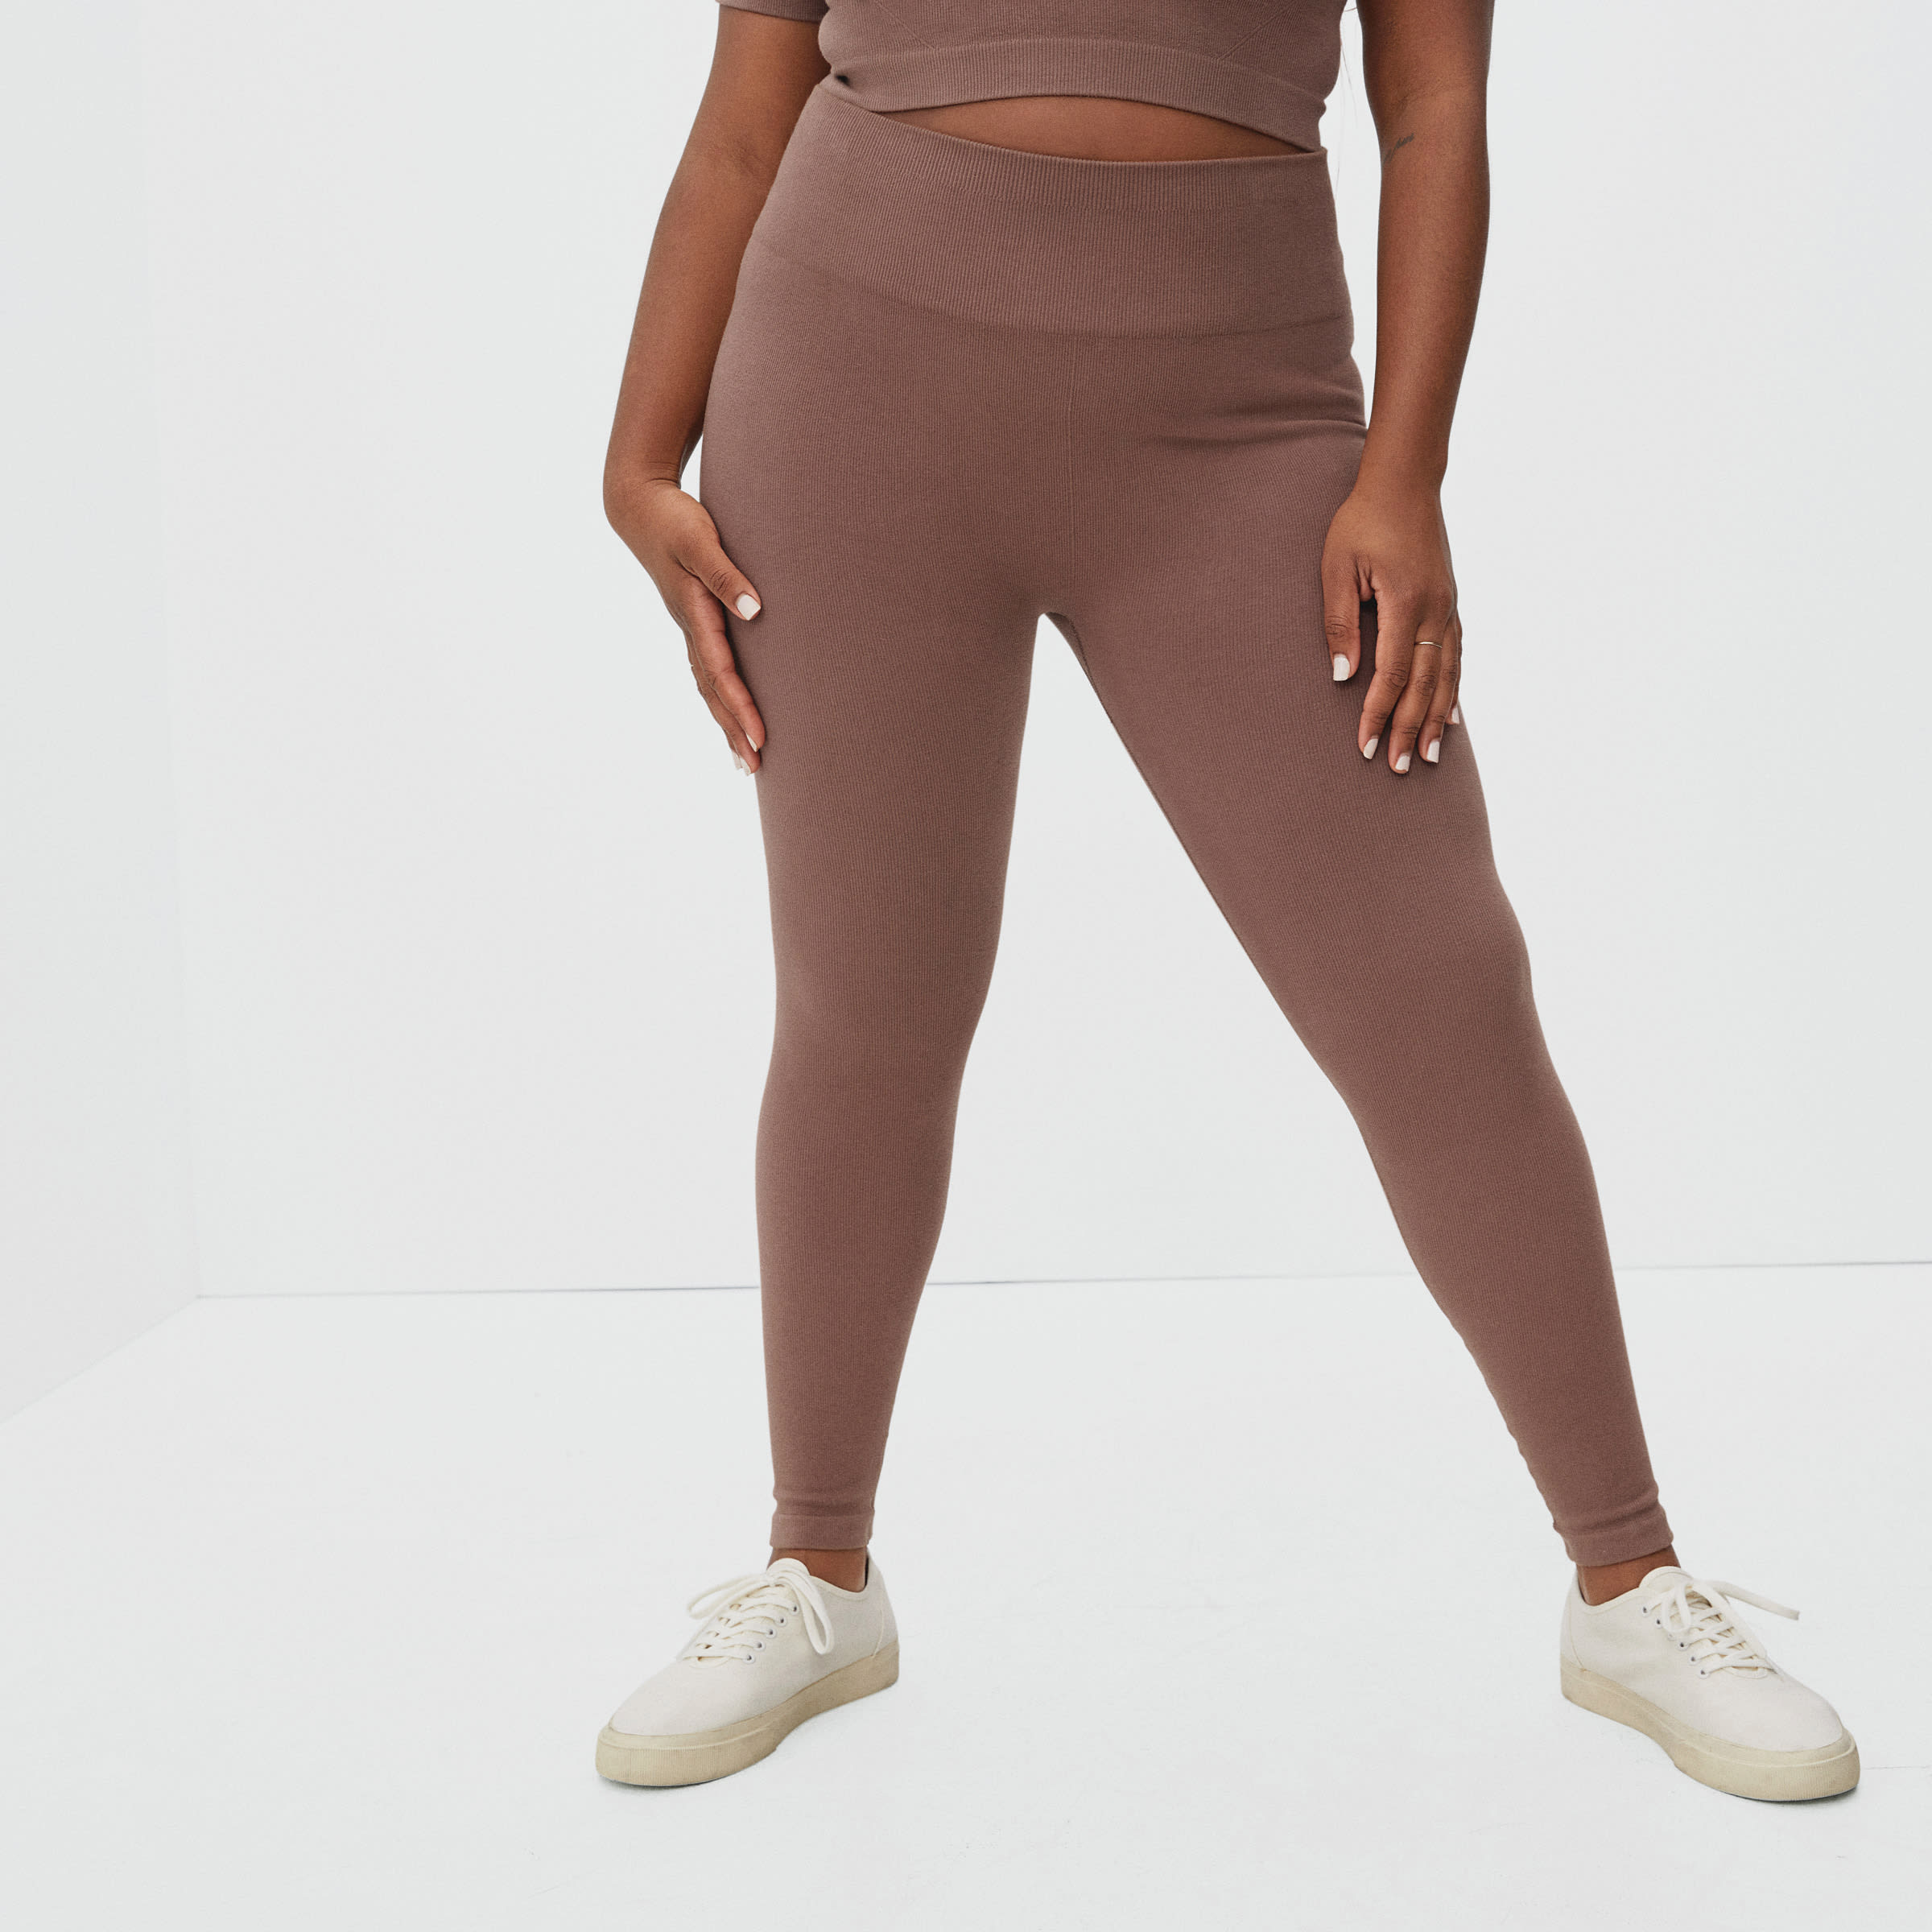 Everlane Leggings are here - and they're only $58!!